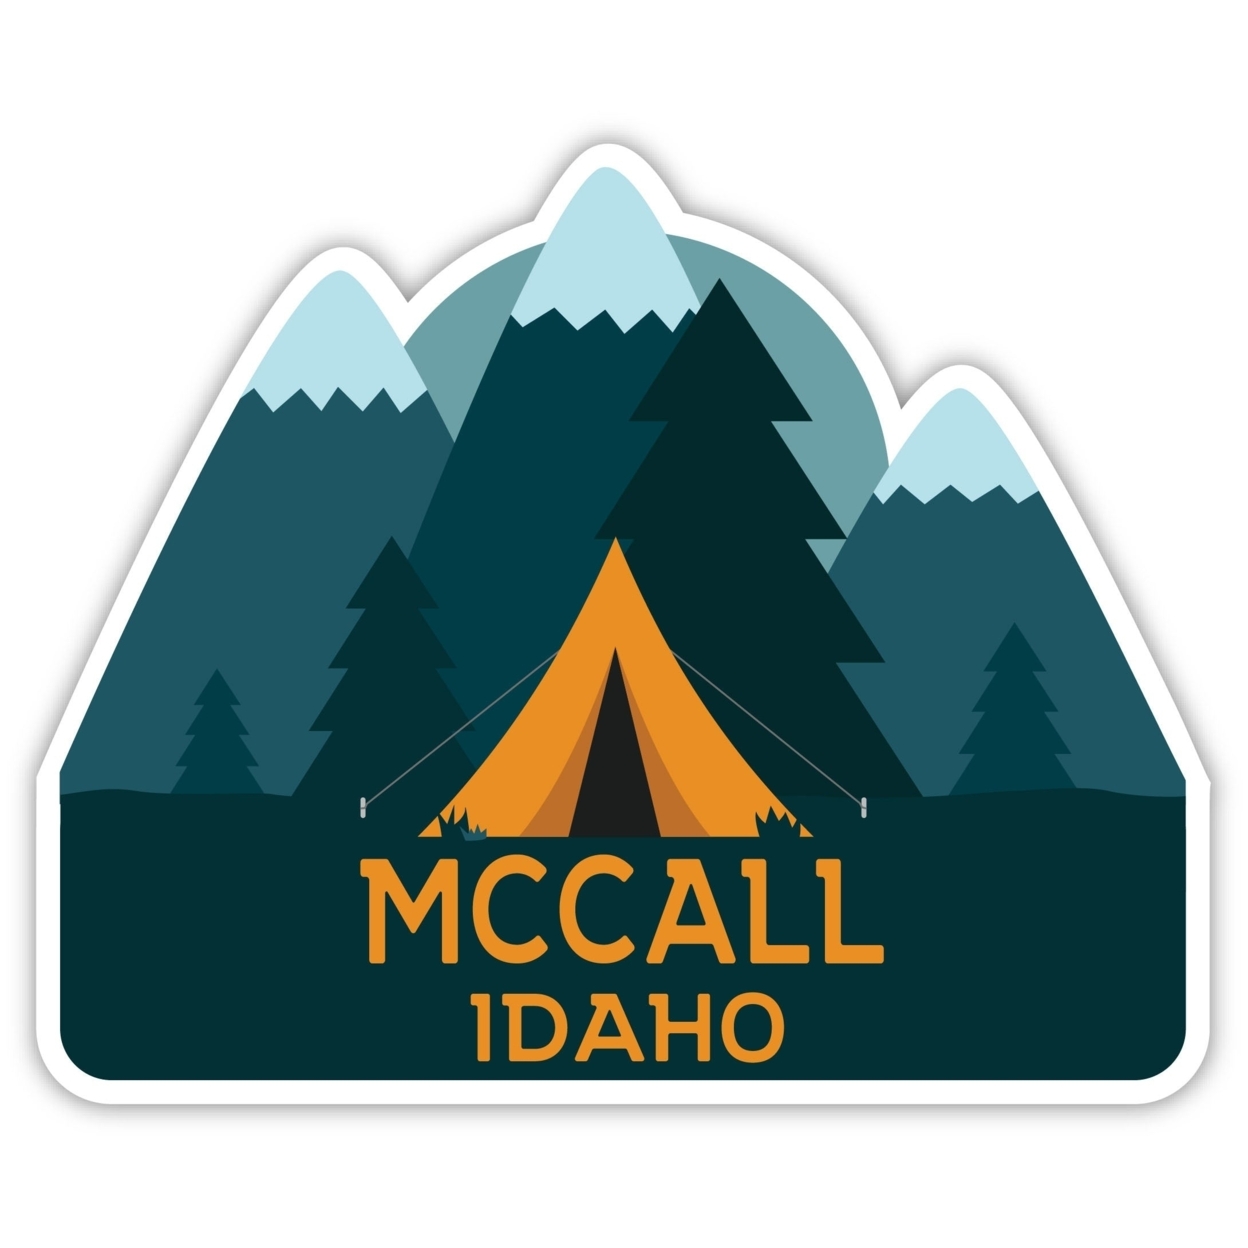 Mccall Idaho Souvenir Decorative Stickers (Choose Theme And Size) - 2-Inch, Camp Life